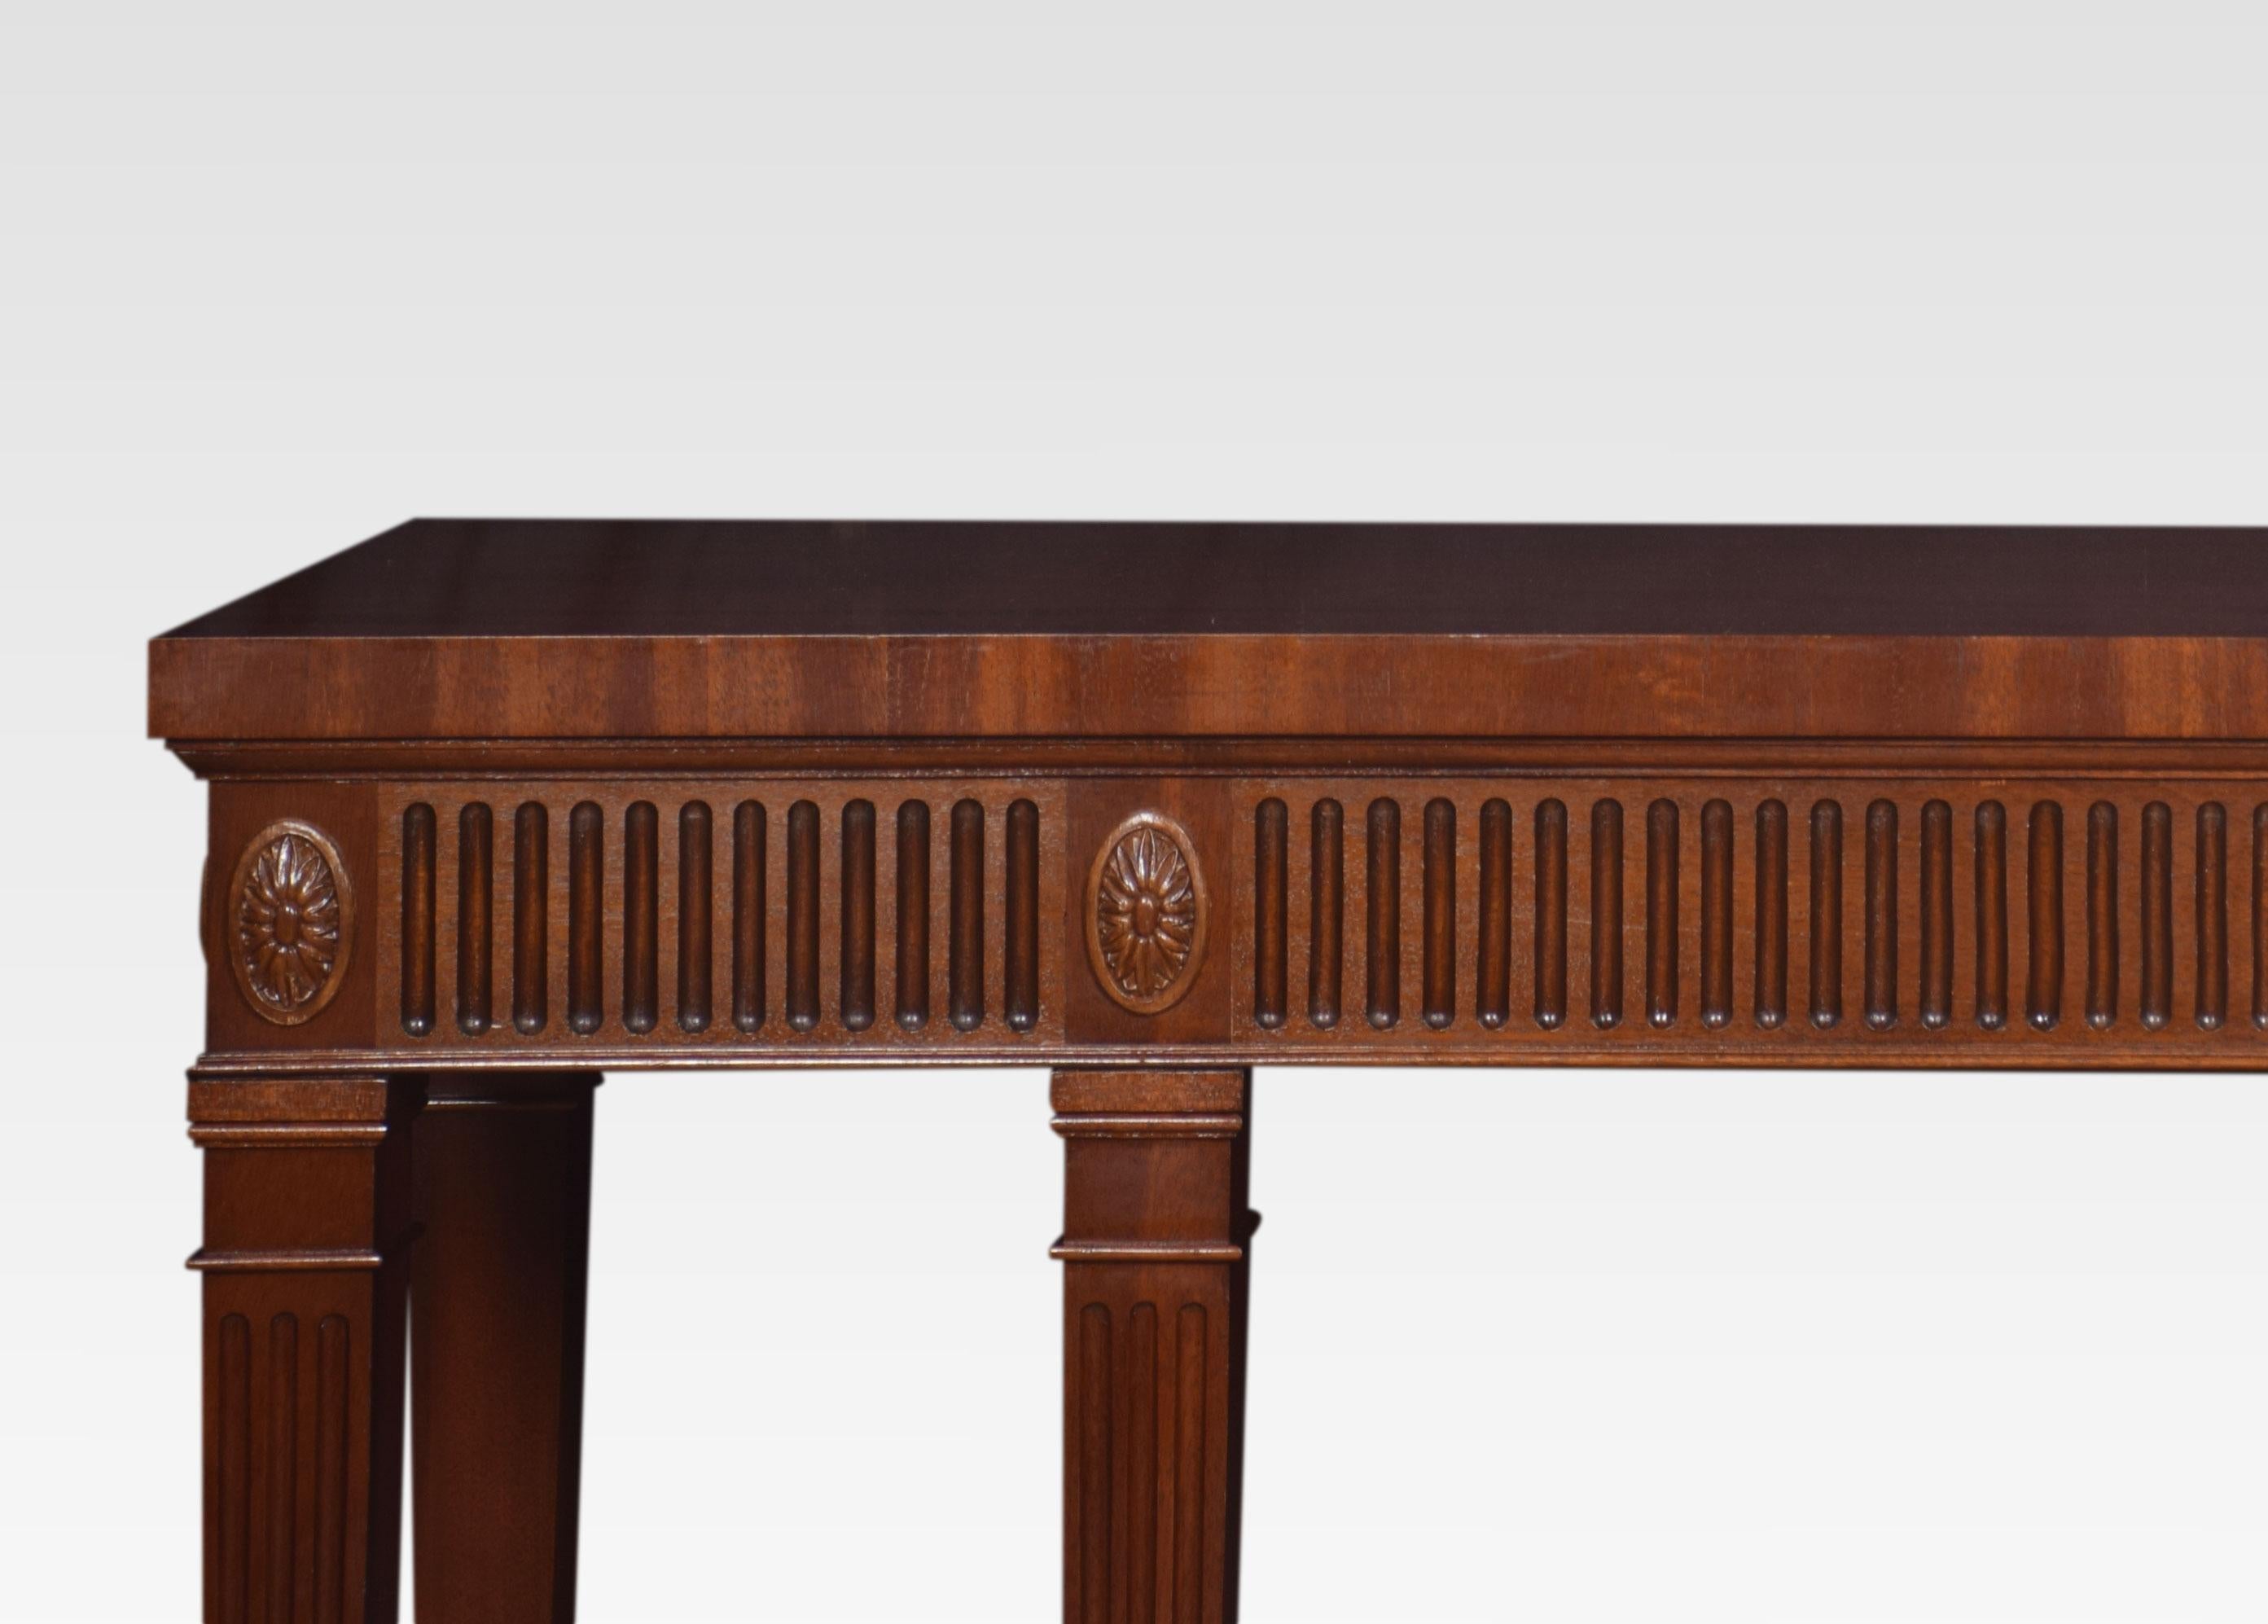 Mahogany console table the large rectangular well figured top above a fluted and paterae applied apron. All raised on six square tapered and fluted legs ending in block feet.
Dimensions
Height 35.5 inches
Width 66 inches
Depth 18.5 inches.